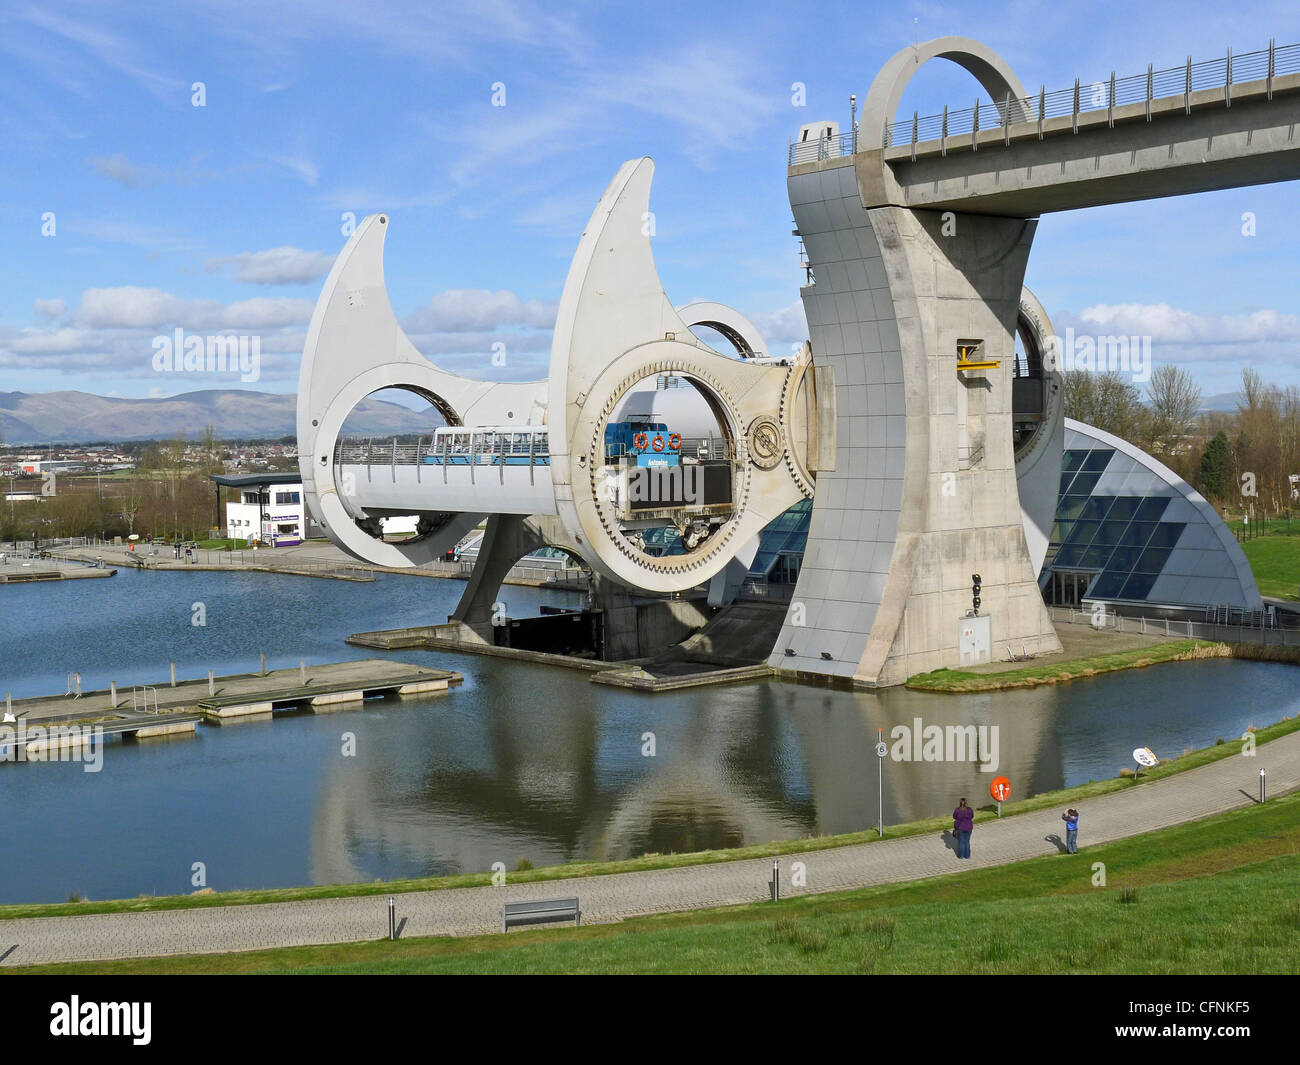 A view from the south/west of the Falkirk Wheel visitor attraction on a still and sunny early spring day with wheel turning Stock Photo